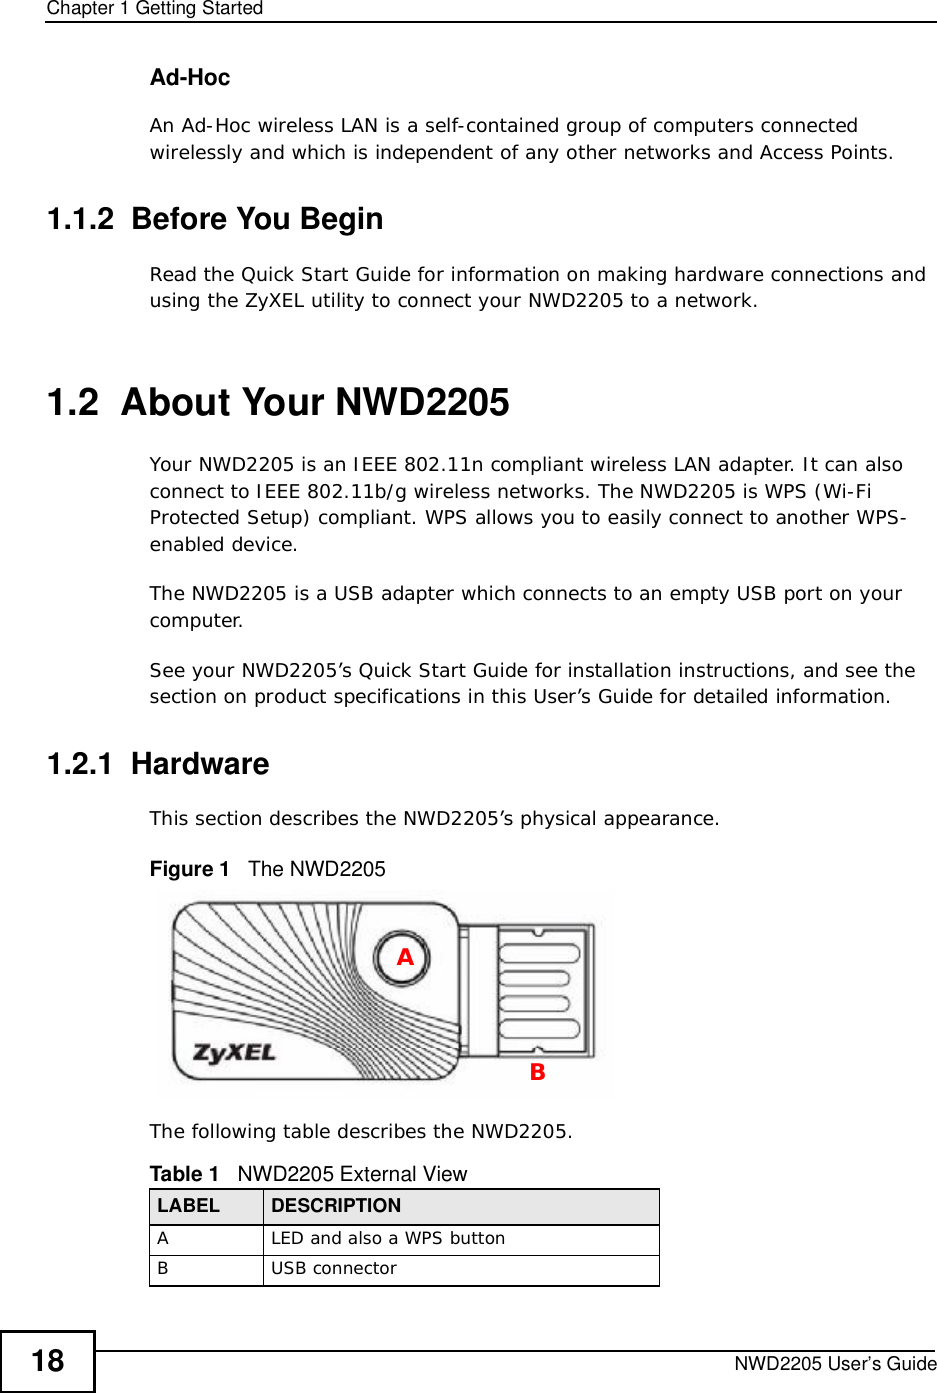 Chapter 1Getting StartedNWD2205 User’s Guide18Ad-HocAn Ad-Hoc wireless LAN is a self-contained group of computers connected wirelessly and which is independent of any other networks and Access Points.1.1.2  Before You BeginRead the Quick Start Guide for information on making hardware connections and using the ZyXEL utility to connect your NWD2205 to a network.1.2  About Your NWD2205    Your NWD2205 is an IEEE 802.11n compliant wireless LAN adapter. It can also connect to IEEE 802.11b/g wireless networks. The NWD2205 is WPS (Wi-Fi Protected Setup) compliant. WPS allows you to easily connect to another WPS-enabled device. The NWD2205 is a USB adapter which connects to an empty USB port on your computer.See your NWD2205’s Quick Start Guide for installation instructions, and see the section on product specifications in this User’s Guide for detailed information.1.2.1  HardwareThis section describes the NWD2205’s physical appearance.Figure 1   The NWD2205The following table describes the NWD2205.Table 1   NWD2205 External ViewLABEL DESCRIPTIONALED and also a WPS buttonBUSB connectorAB